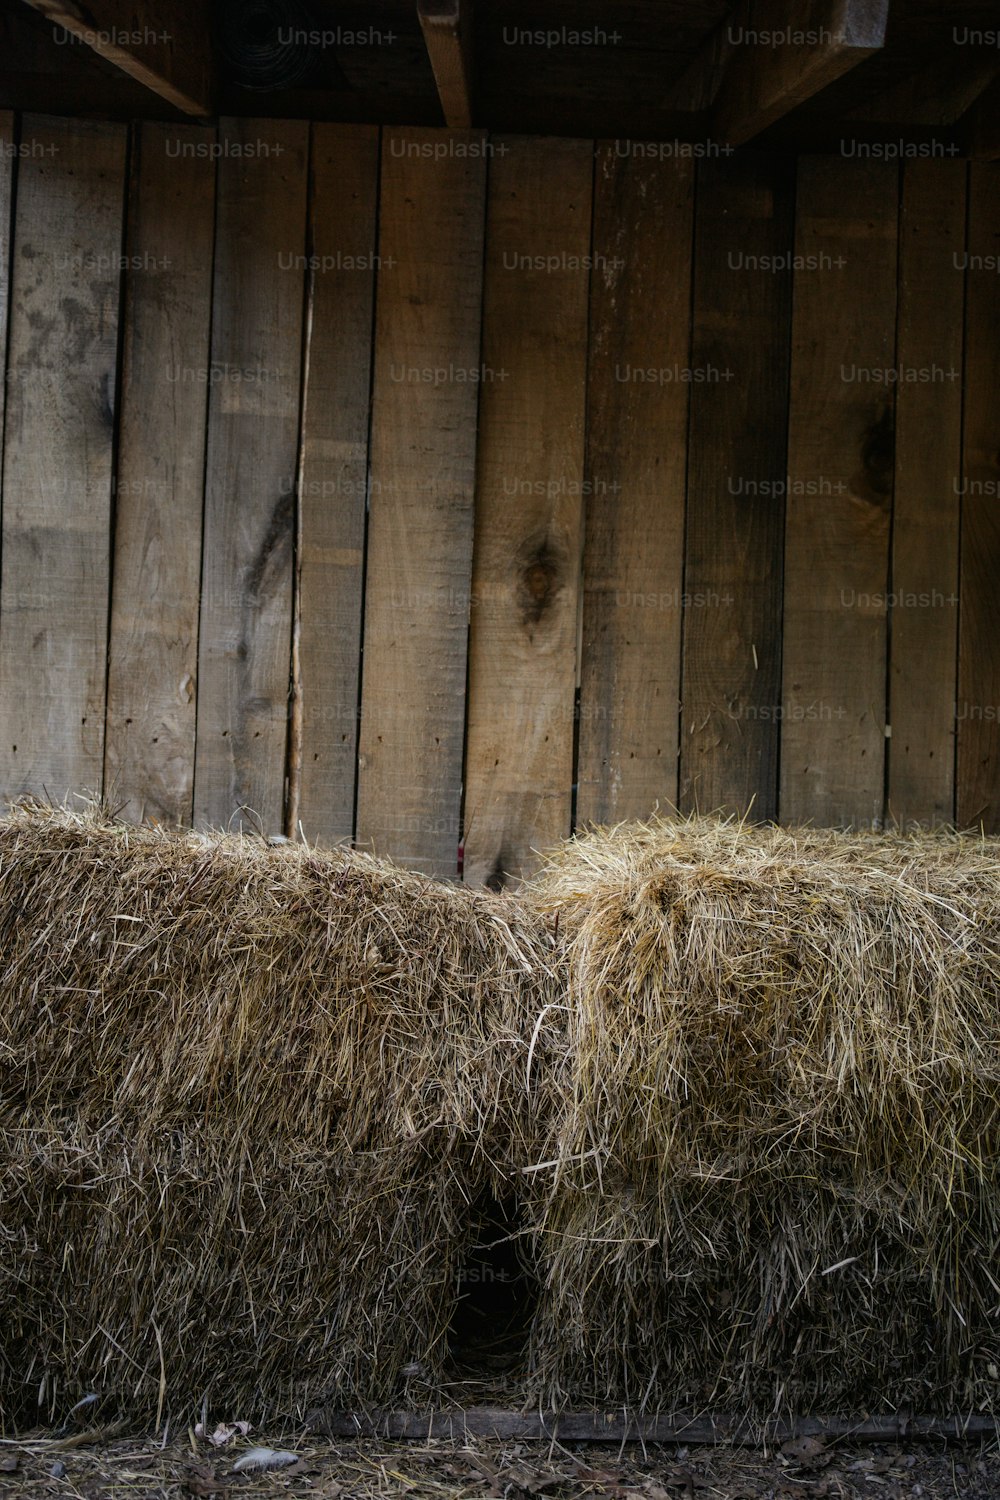 a sheep standing next to a pile of hay